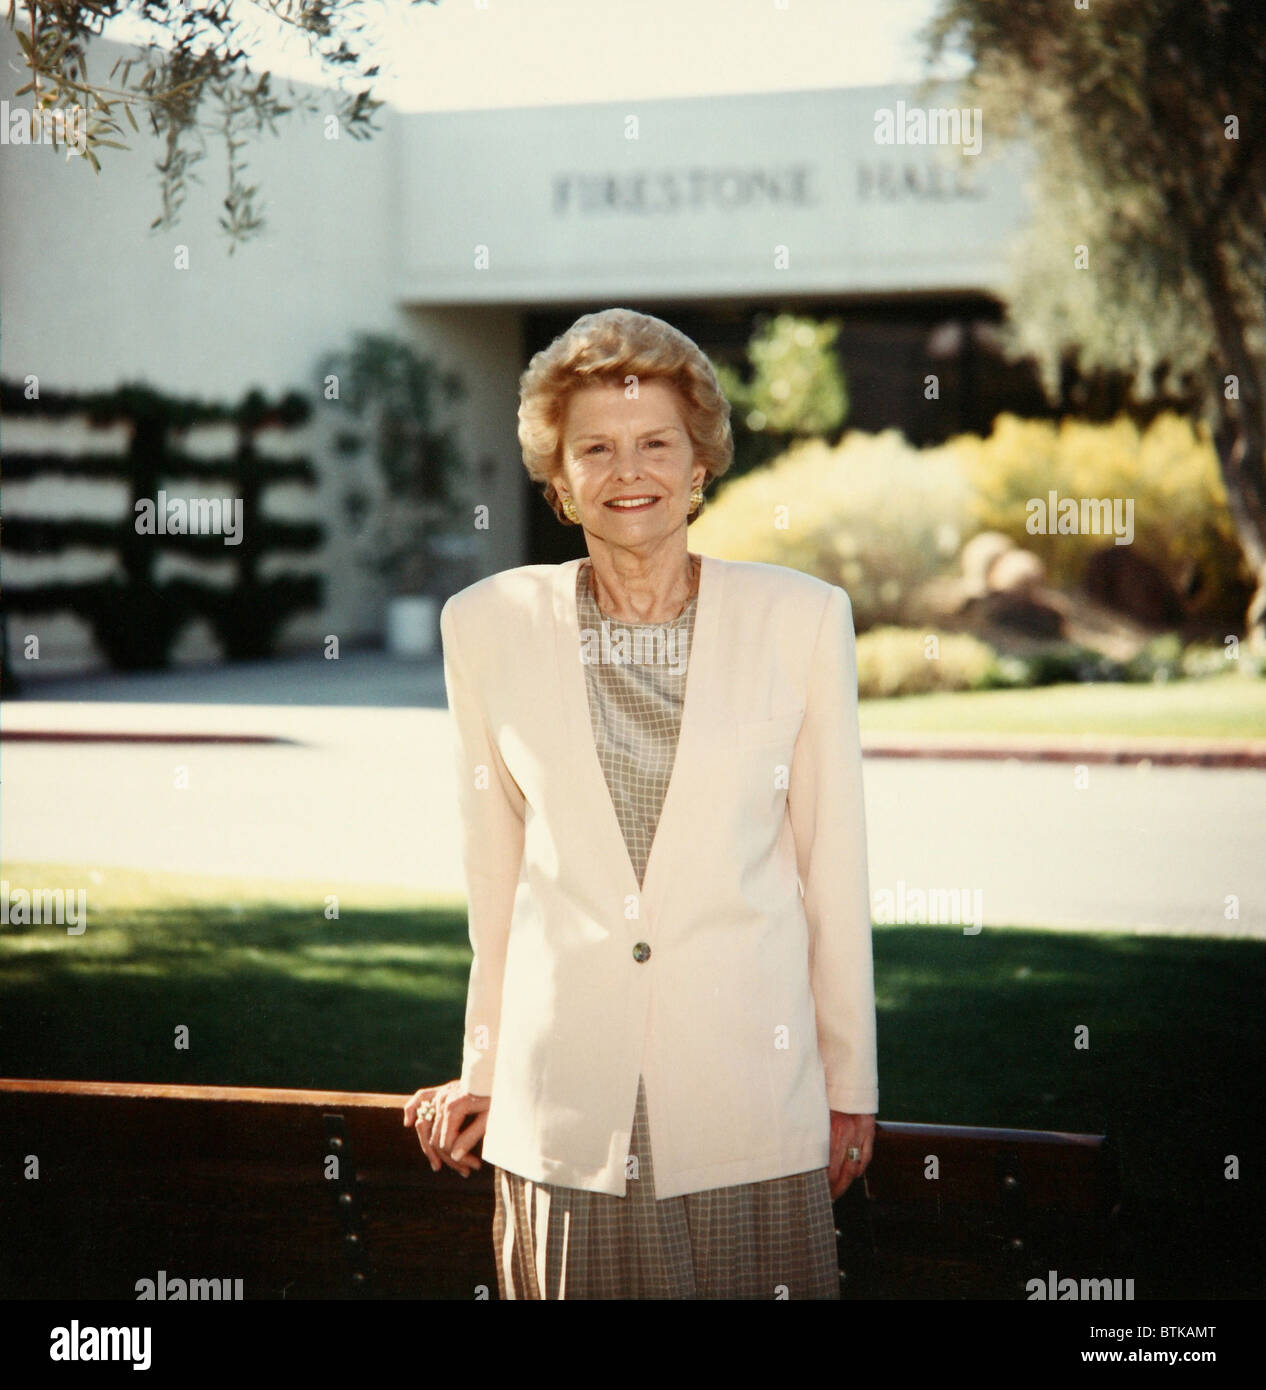 Former First Lady Betty Ford posing in front of the Betty Ford Center for treatment of dependency on drugs and alcohol. She was candid about her own successful battle against addiction. 1990 image courtesy of Betty Ford Center. Stock Photo